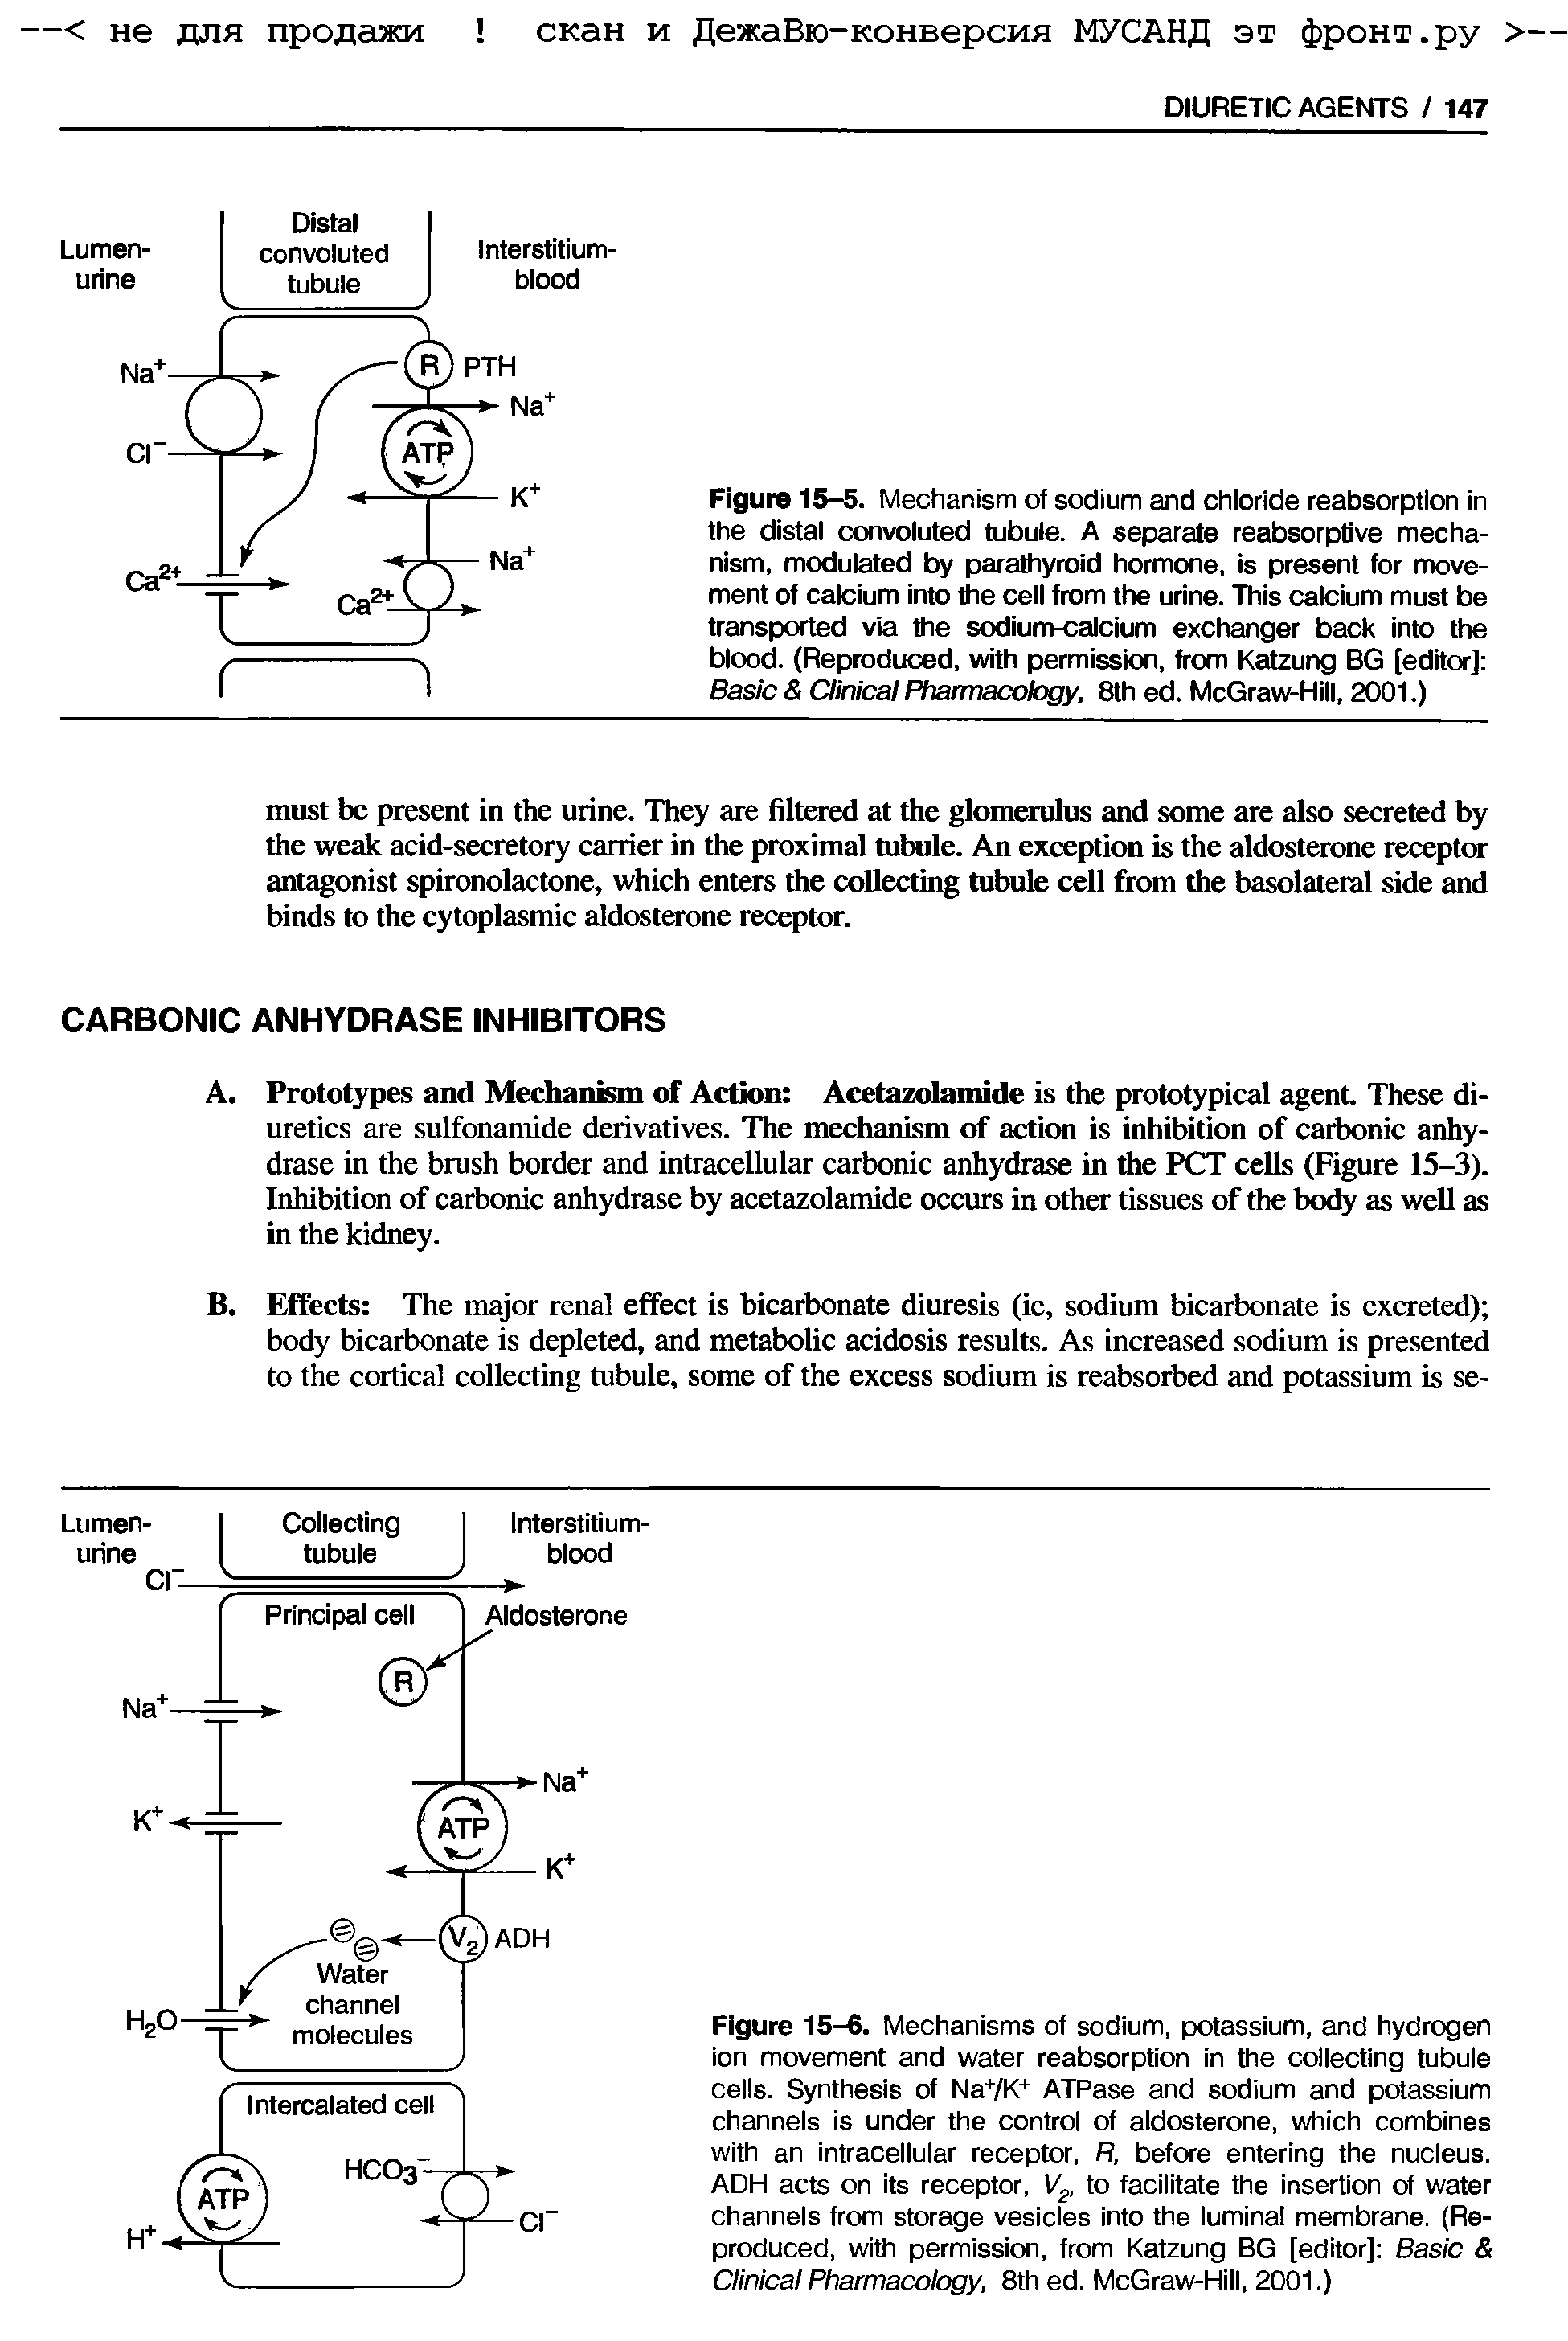 Figure 15-6. Mechanisms of sodium, potassium, and hydrogen ion movement and water reabsorption in the collecting tubule cells. Synthesis of Na+/K+ ATPase and sodium and potassium channels is under the control of aldosterone, which combines with an intracellular receptor, R, before entering the nucleus. ADH acts on its receptor, V, to facilitate the insertion of water channels from storage vesicles into the luminal membrane. (Reproduced, with permission, from Katzung BG [editor] Basic Clinical Pharmacology, 8th ed. McGraw-Hill, 2001.)...